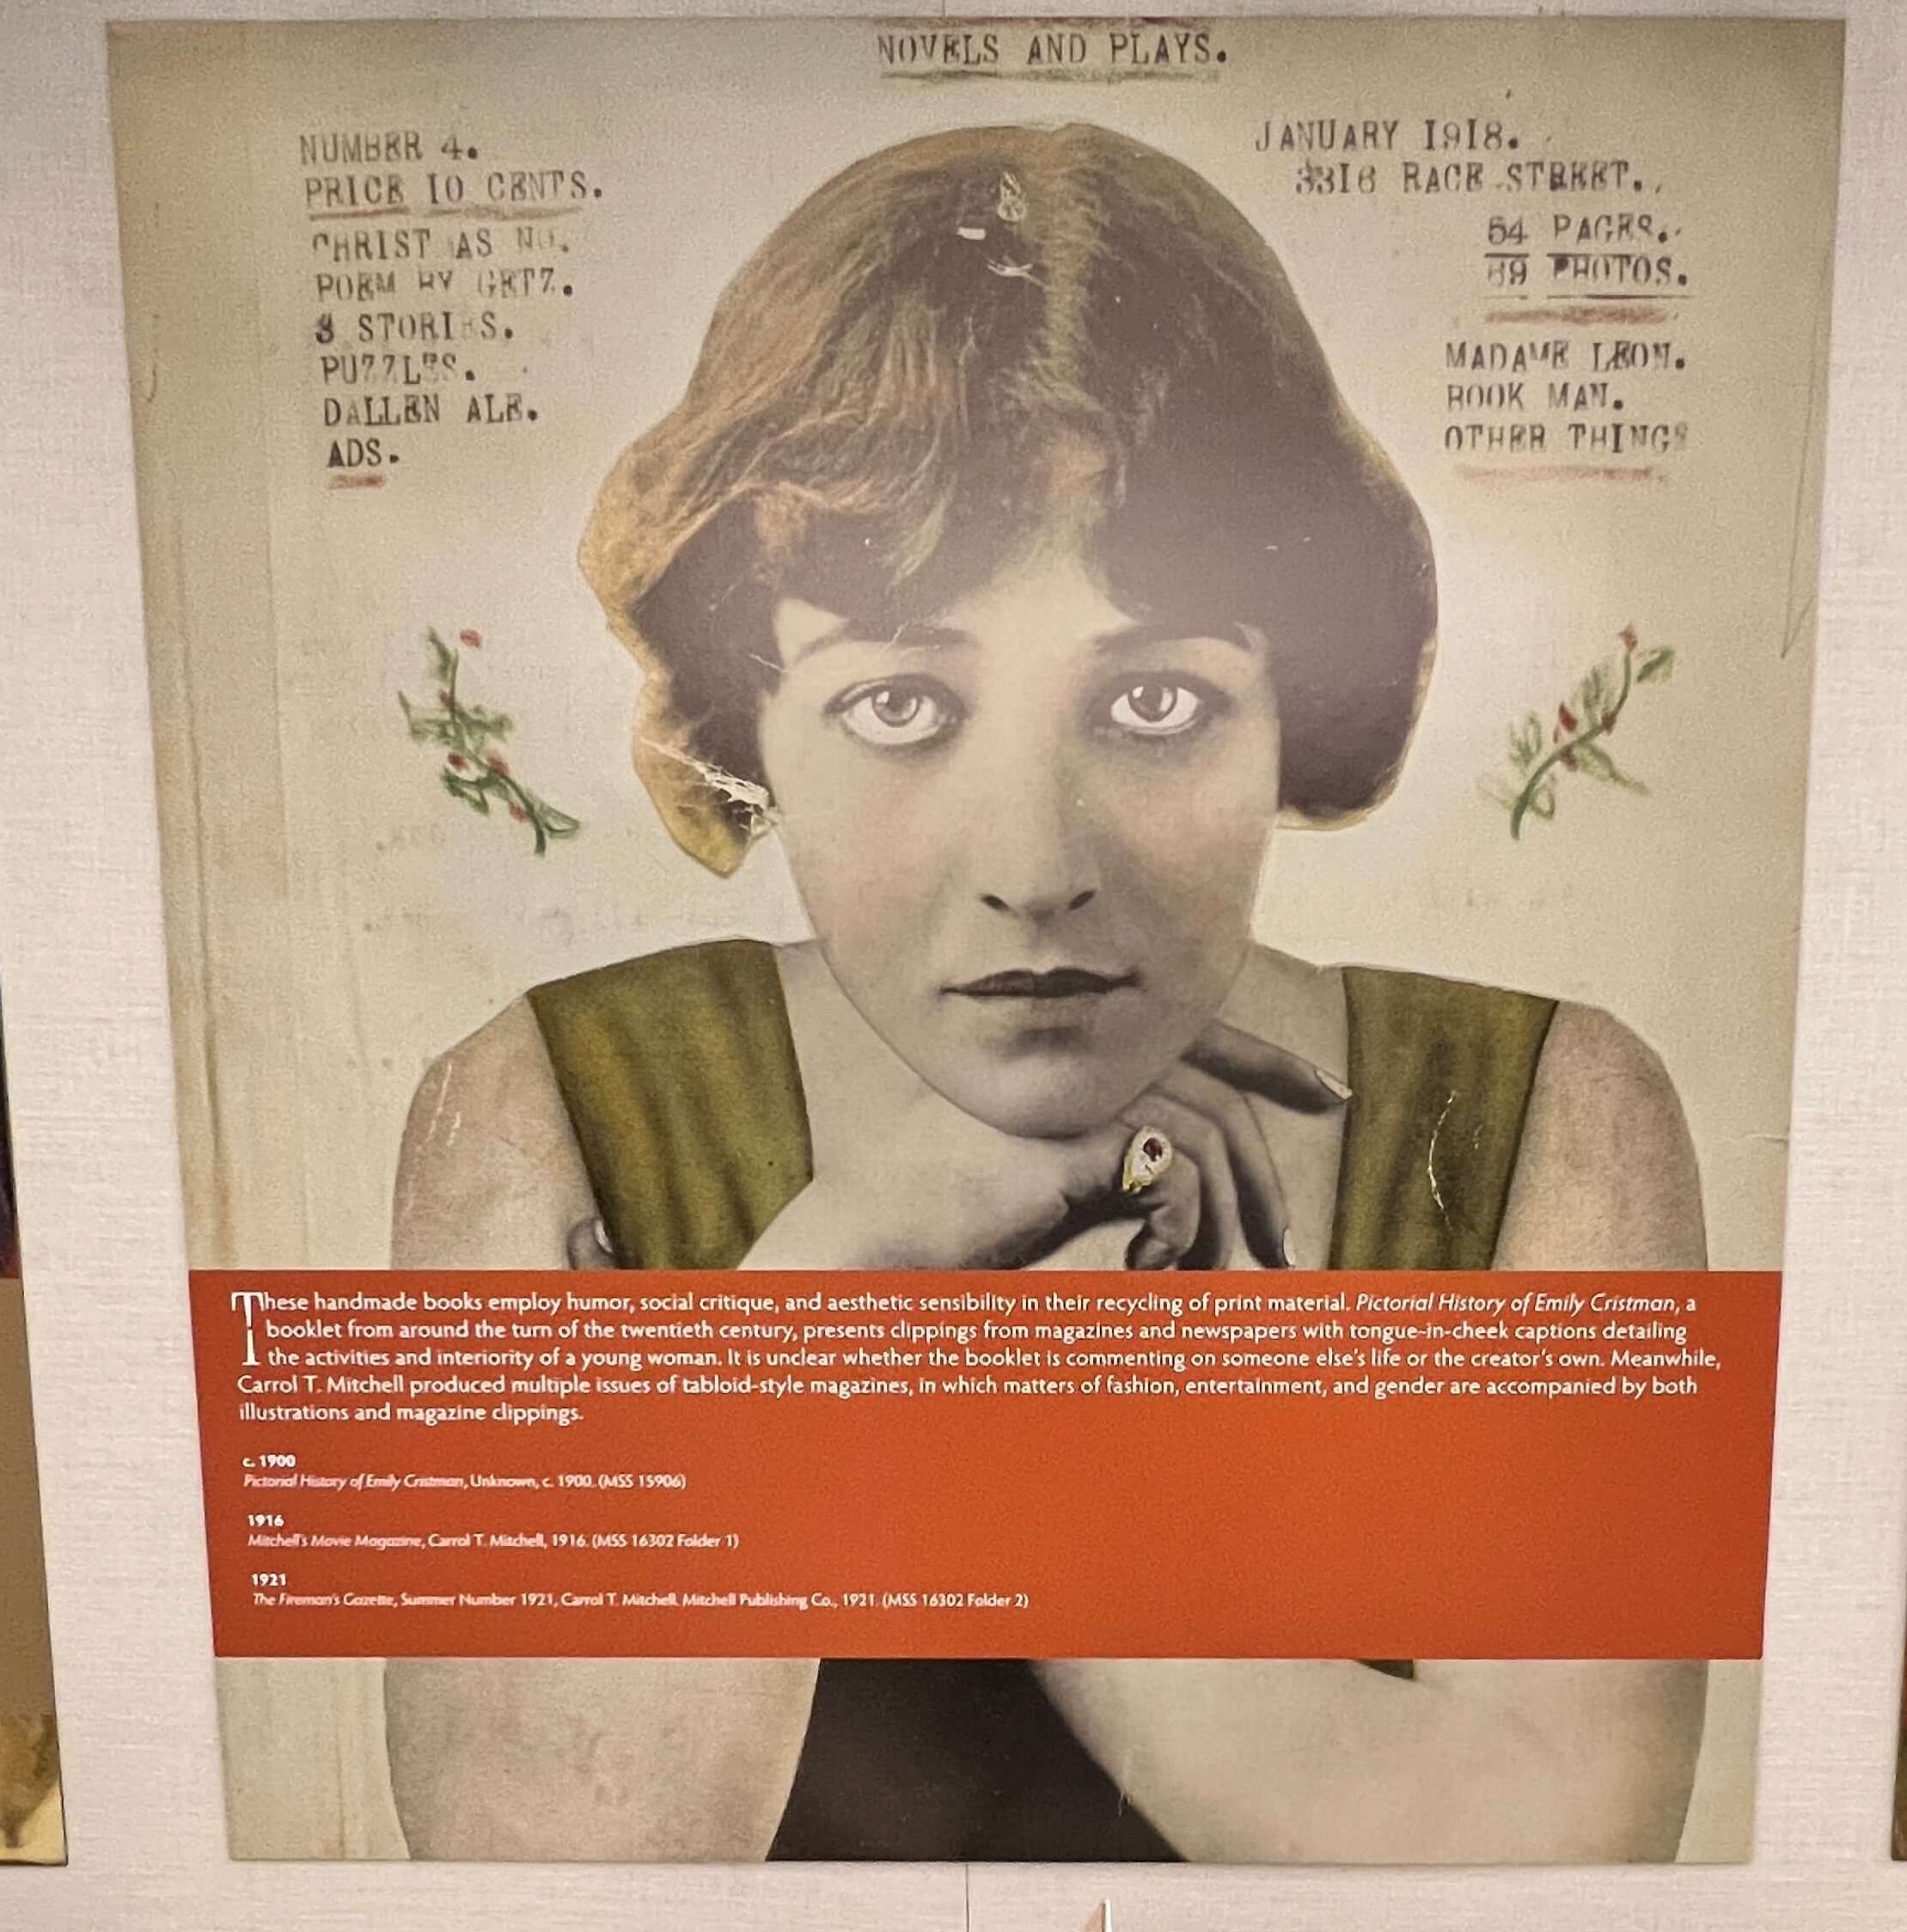 A "flapper" style woman from a magazine ad is featured in this scrapbook.